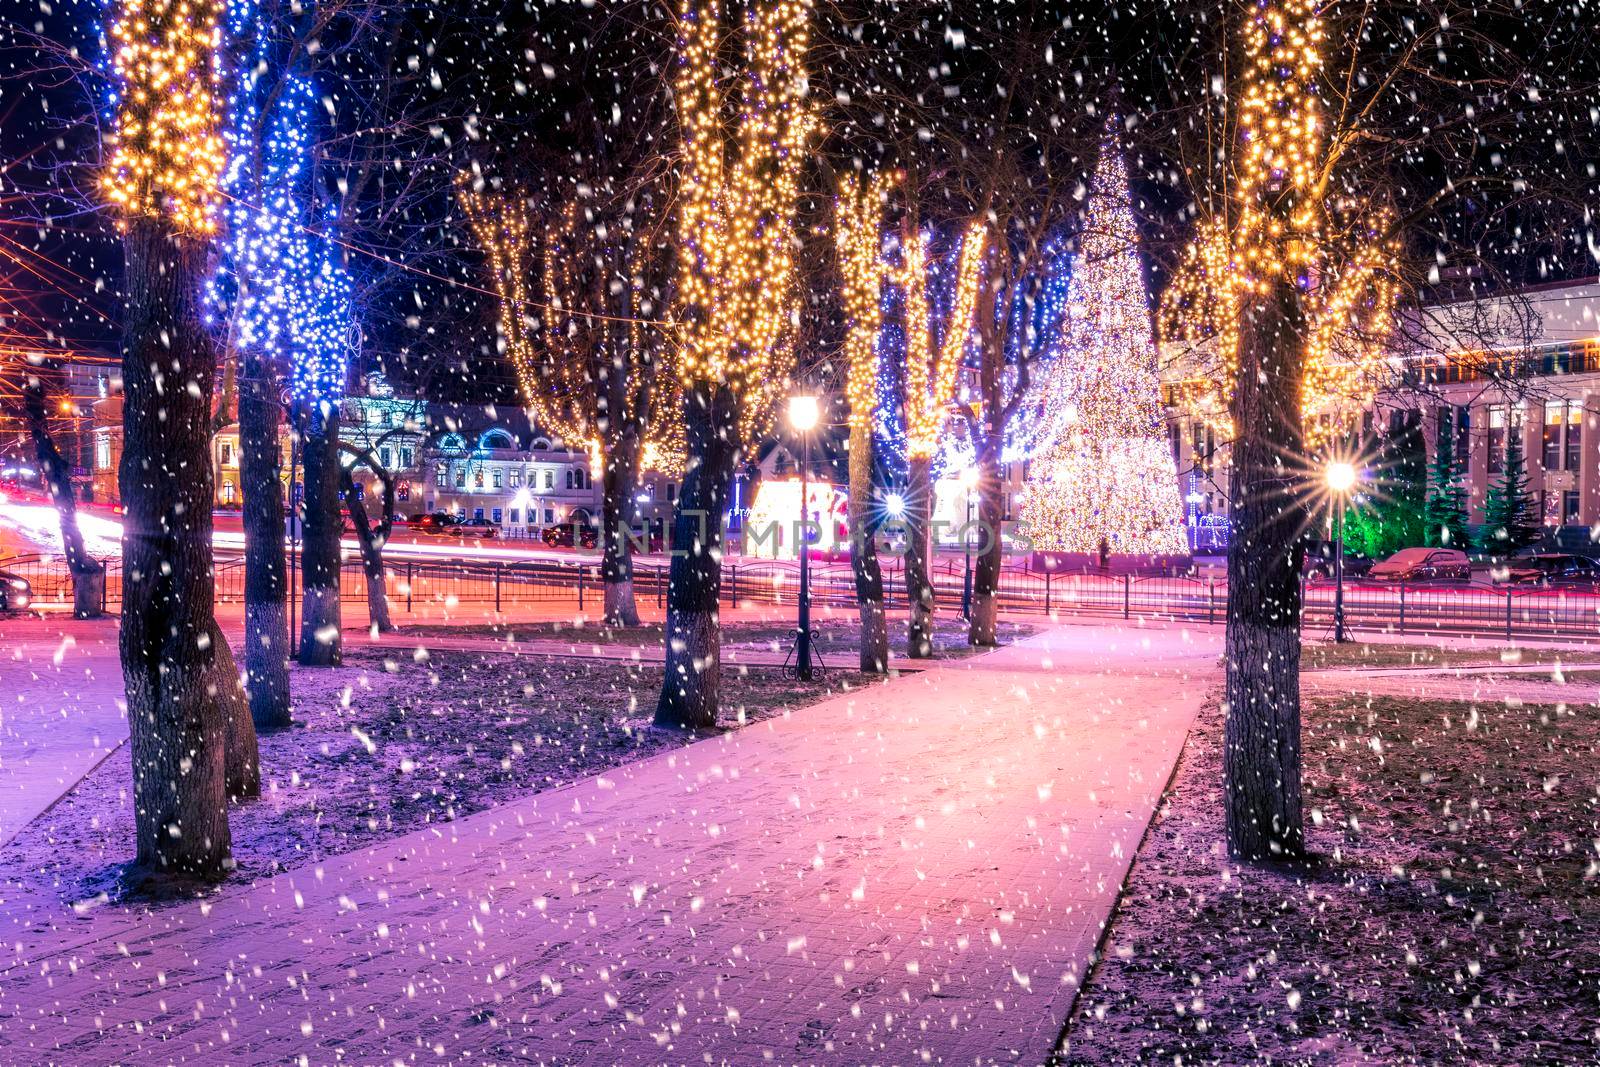 Snowfall in a winter night park with christmas decorations, lights, pavement covered with snow and trees. by Eugene_Yemelyanov